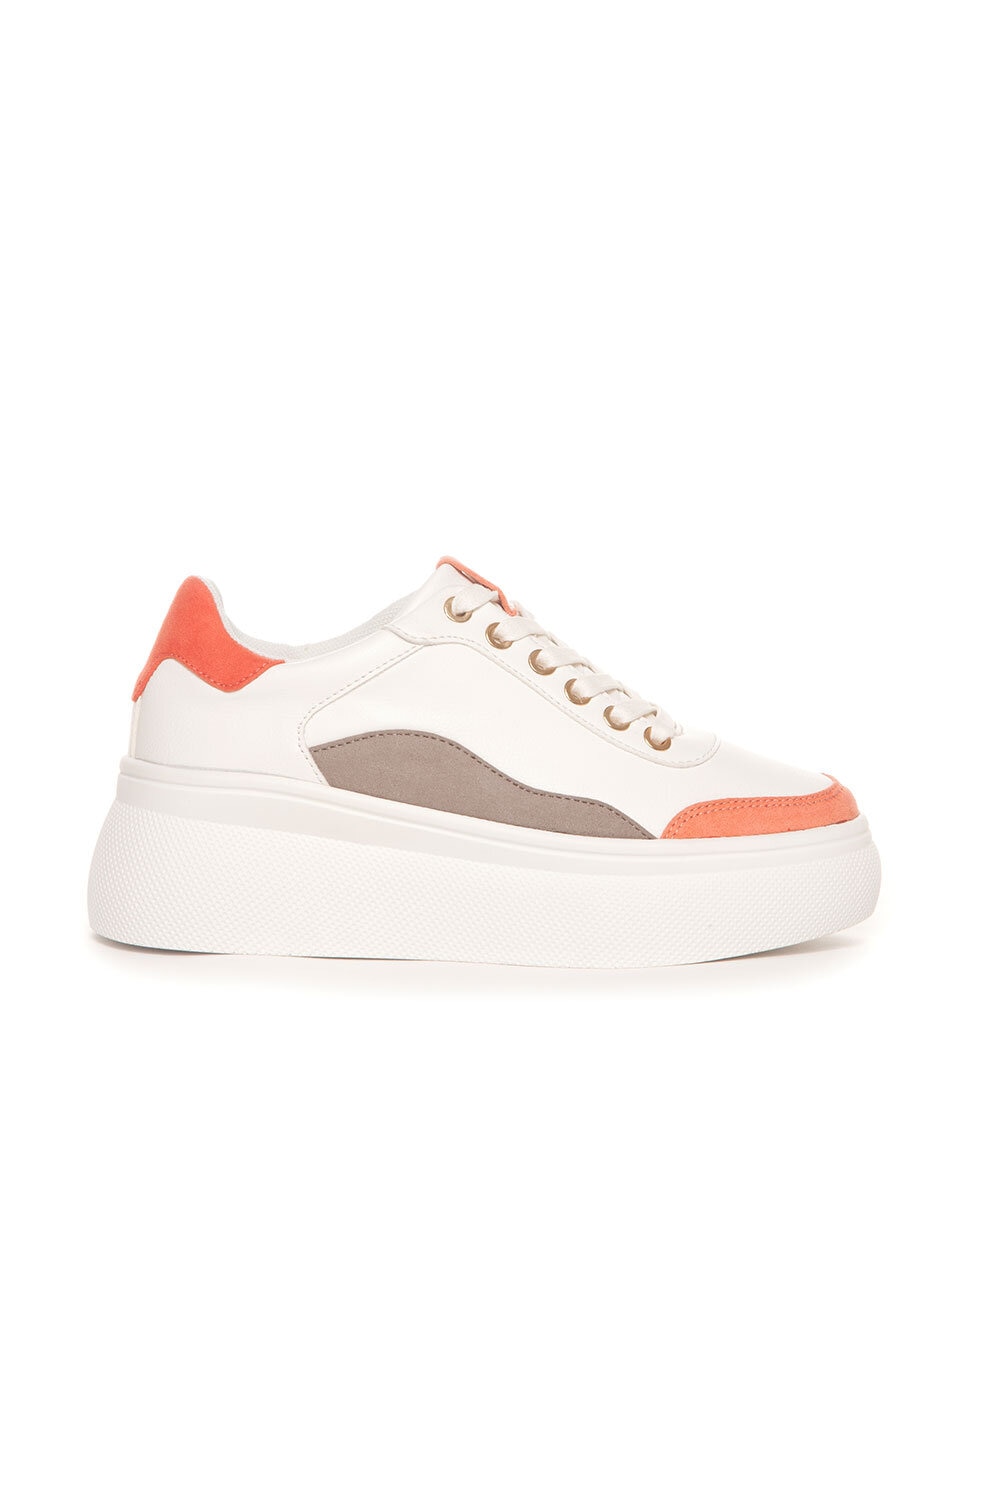 Sneakers Plateau - White/Corall